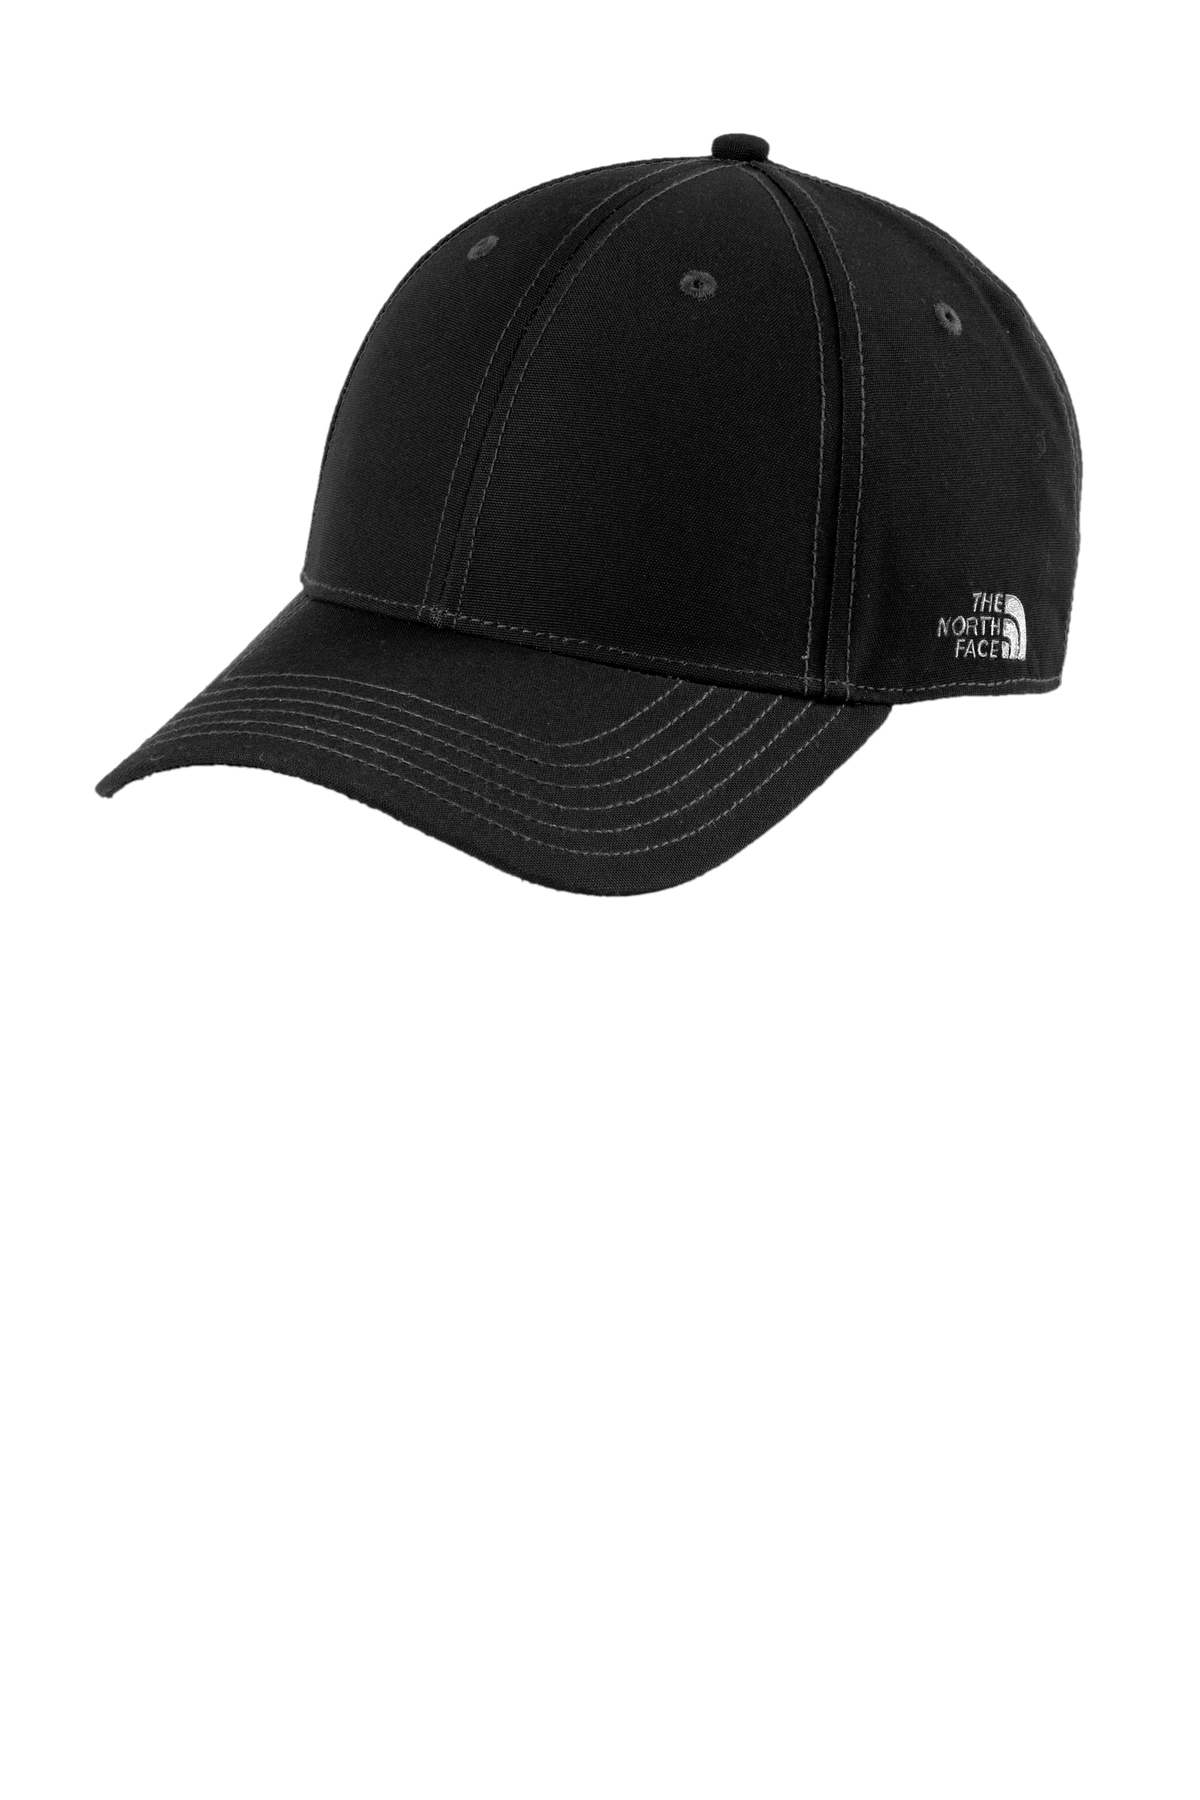 The North Face® Recycled Classic Cap. NF0A4VU9. Closeout